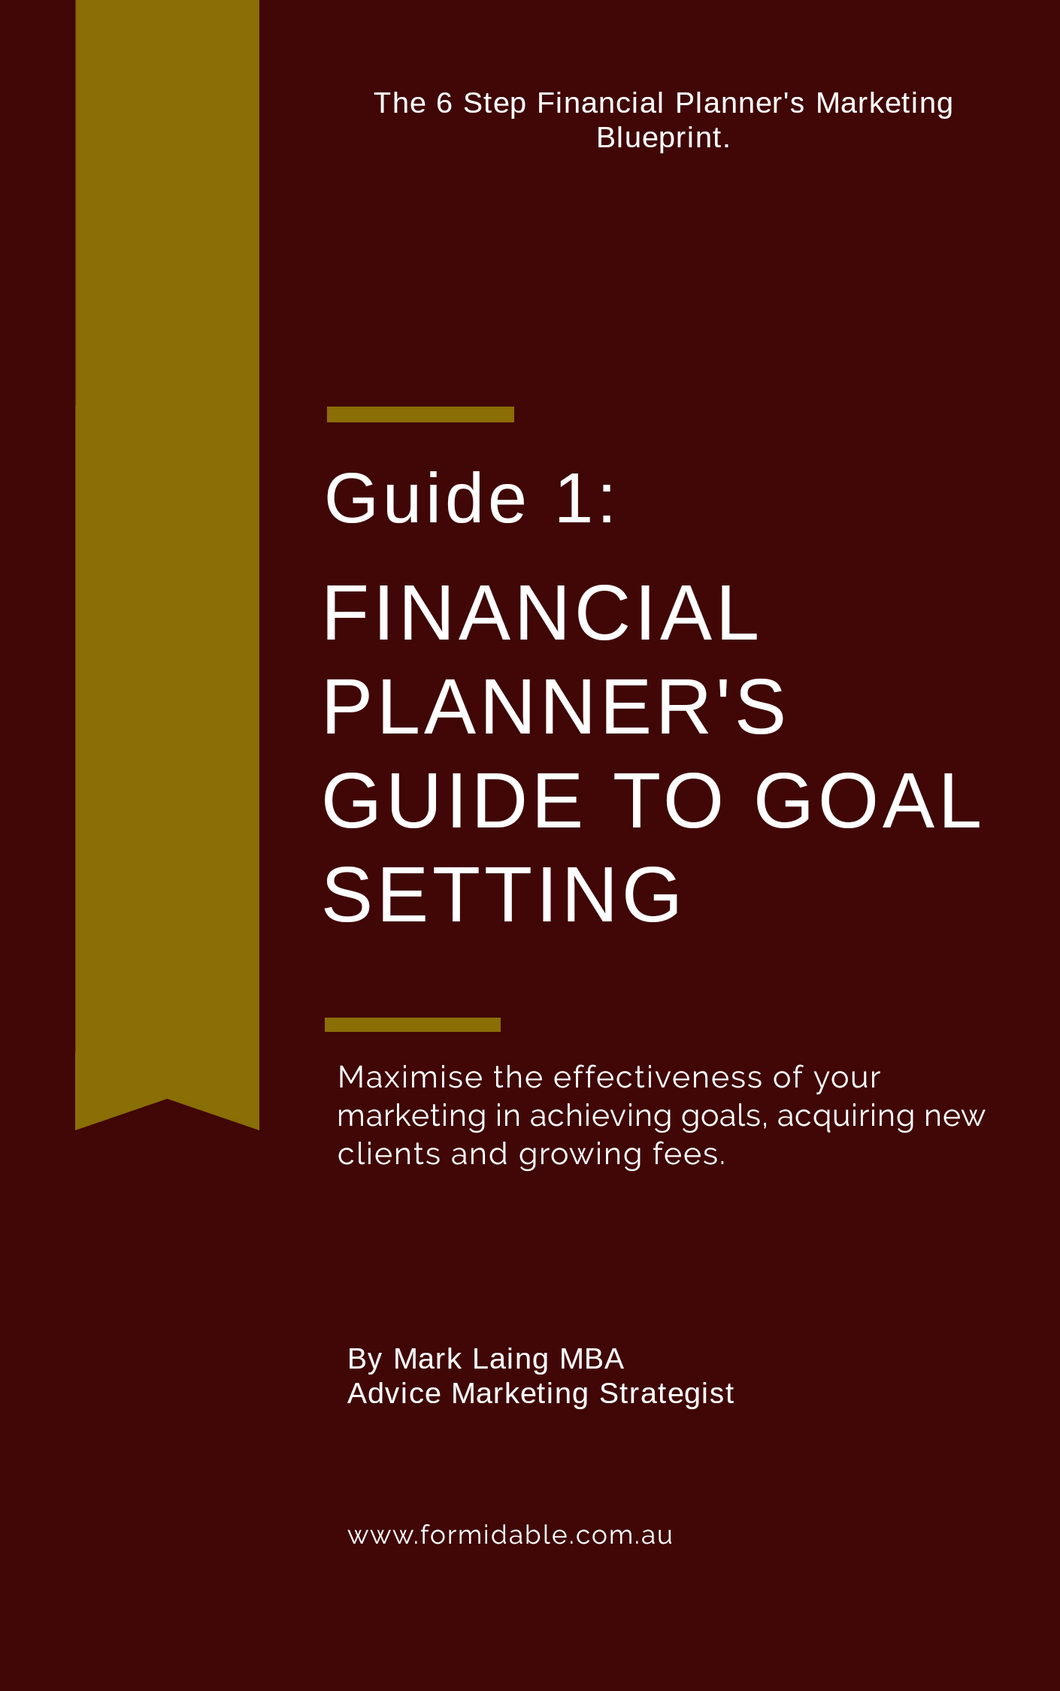 Guide 1: Financial Planner's Guide to Goal Setting (free)